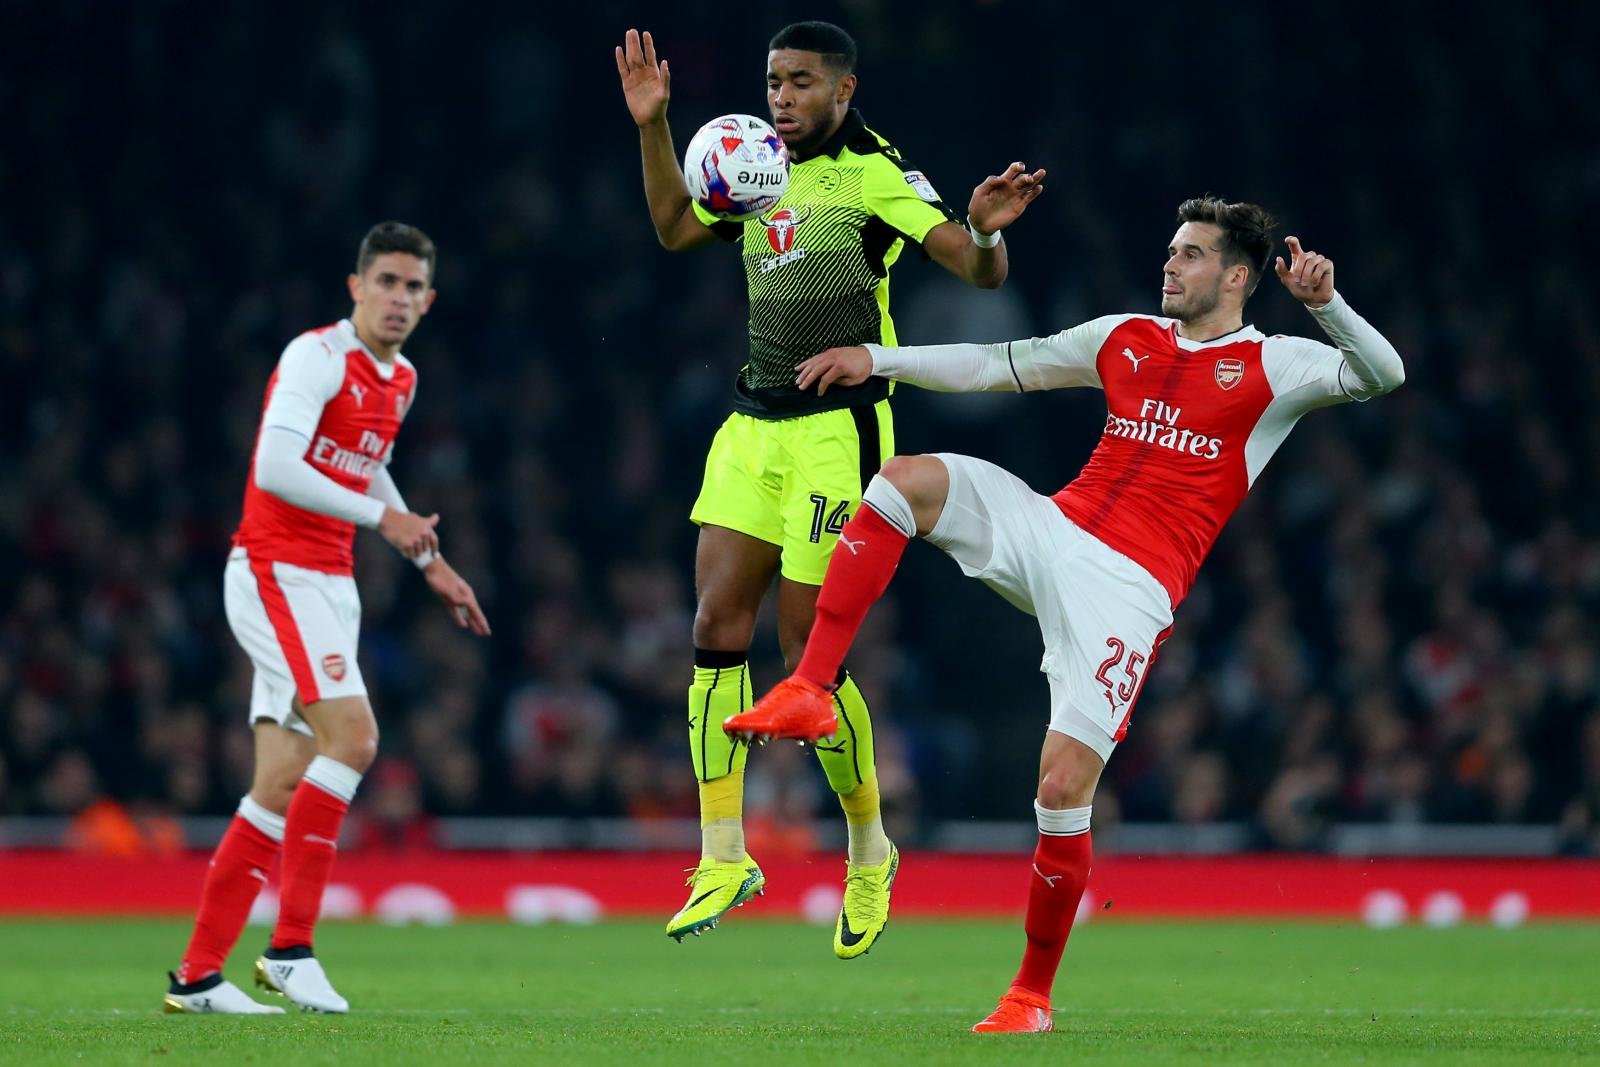 Arsenal defender eyed for January move